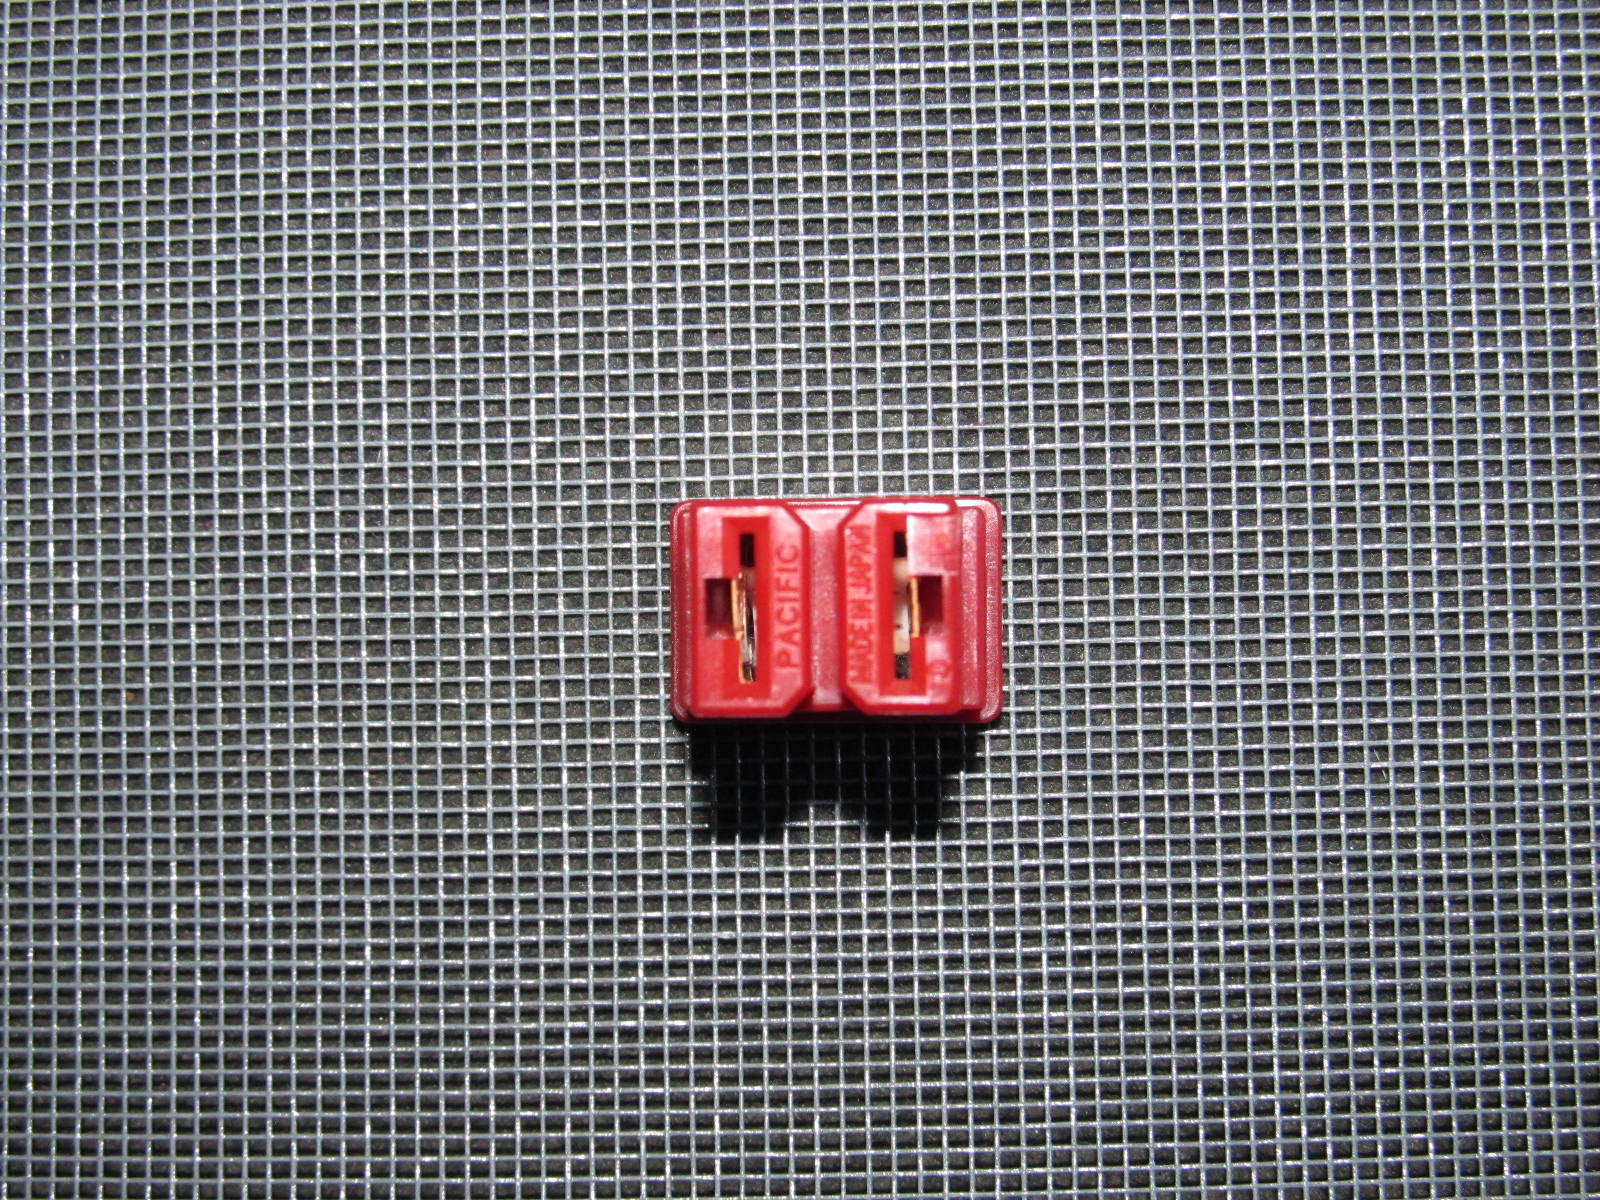 Toyota & Lexus Universal Fuse 30A - Red